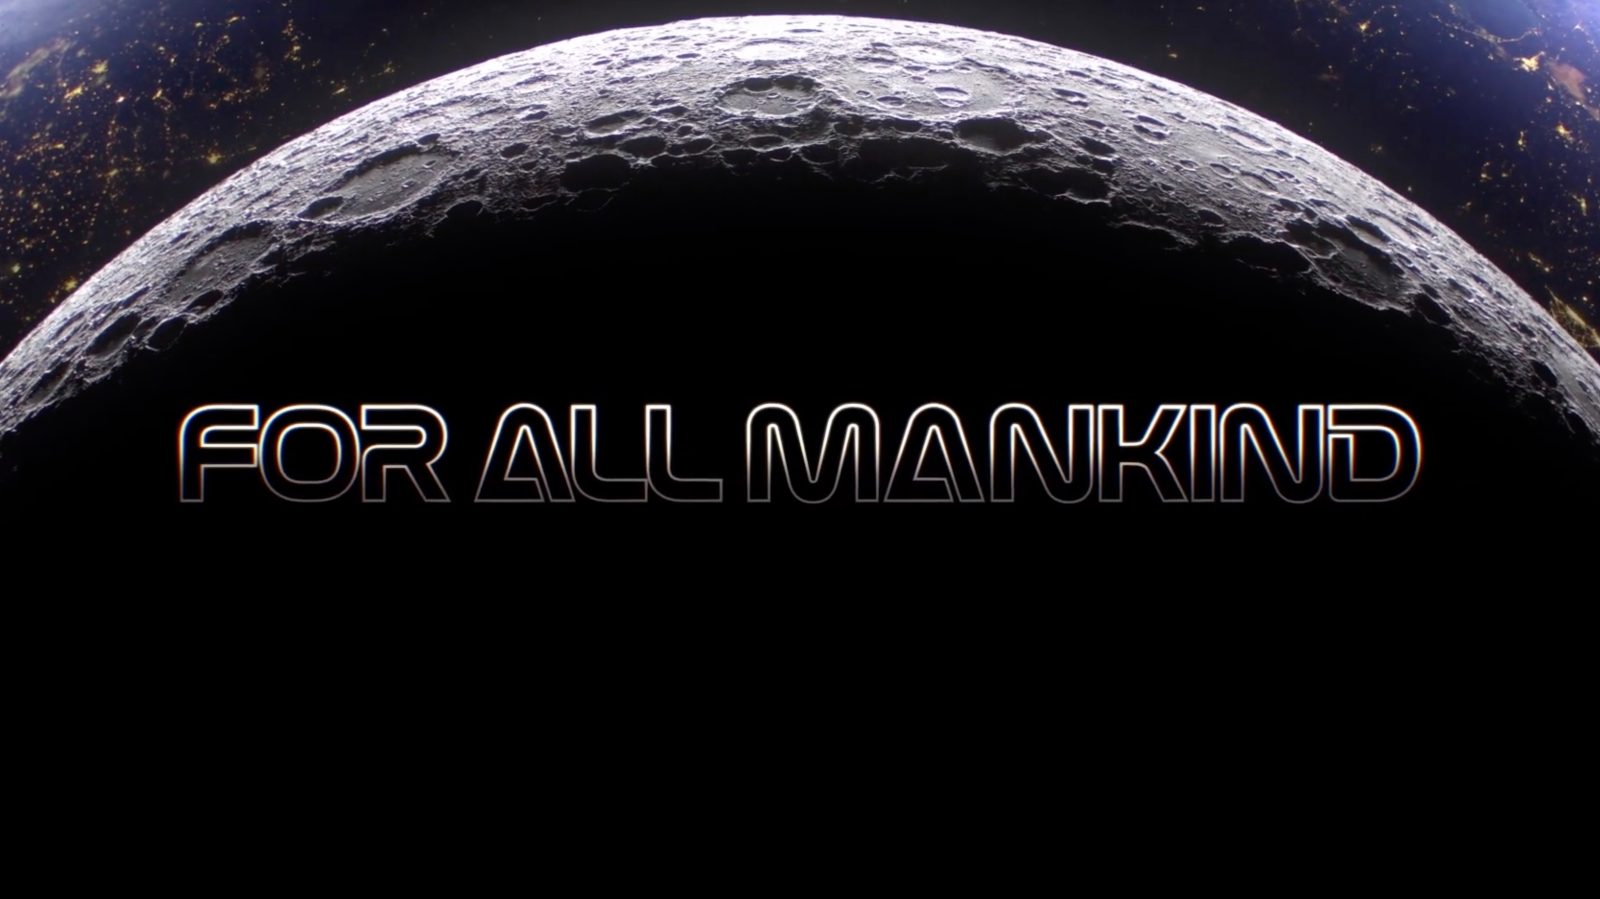 Russia Lands On The Moon First In For All Mankind Trailer